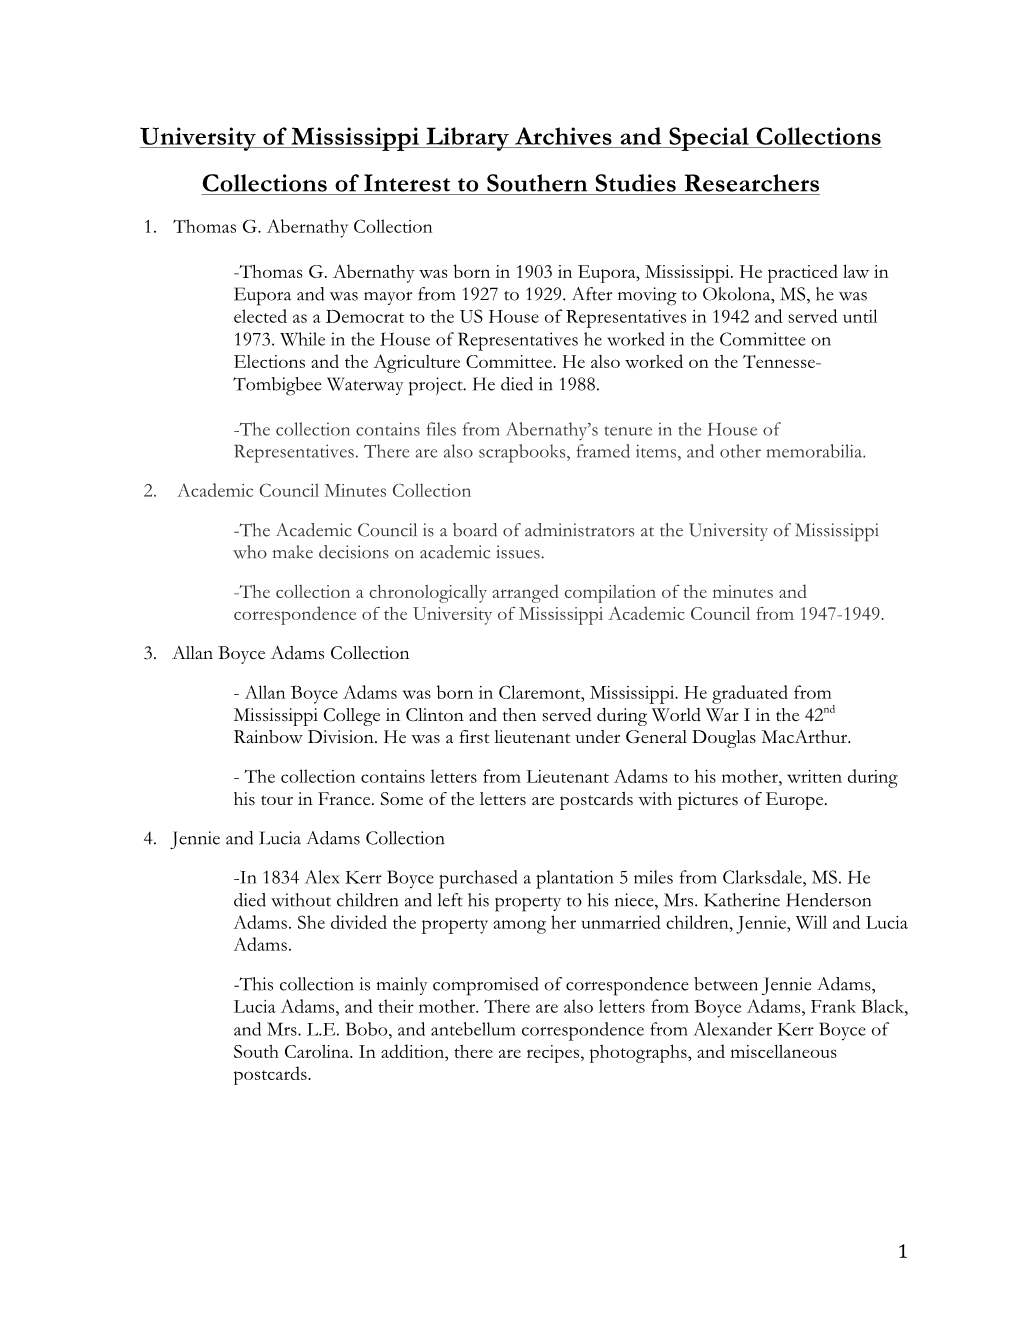 University of Mississippi Library Archives and Special Collections Collections of Interest to Southern Studies Researchers 1